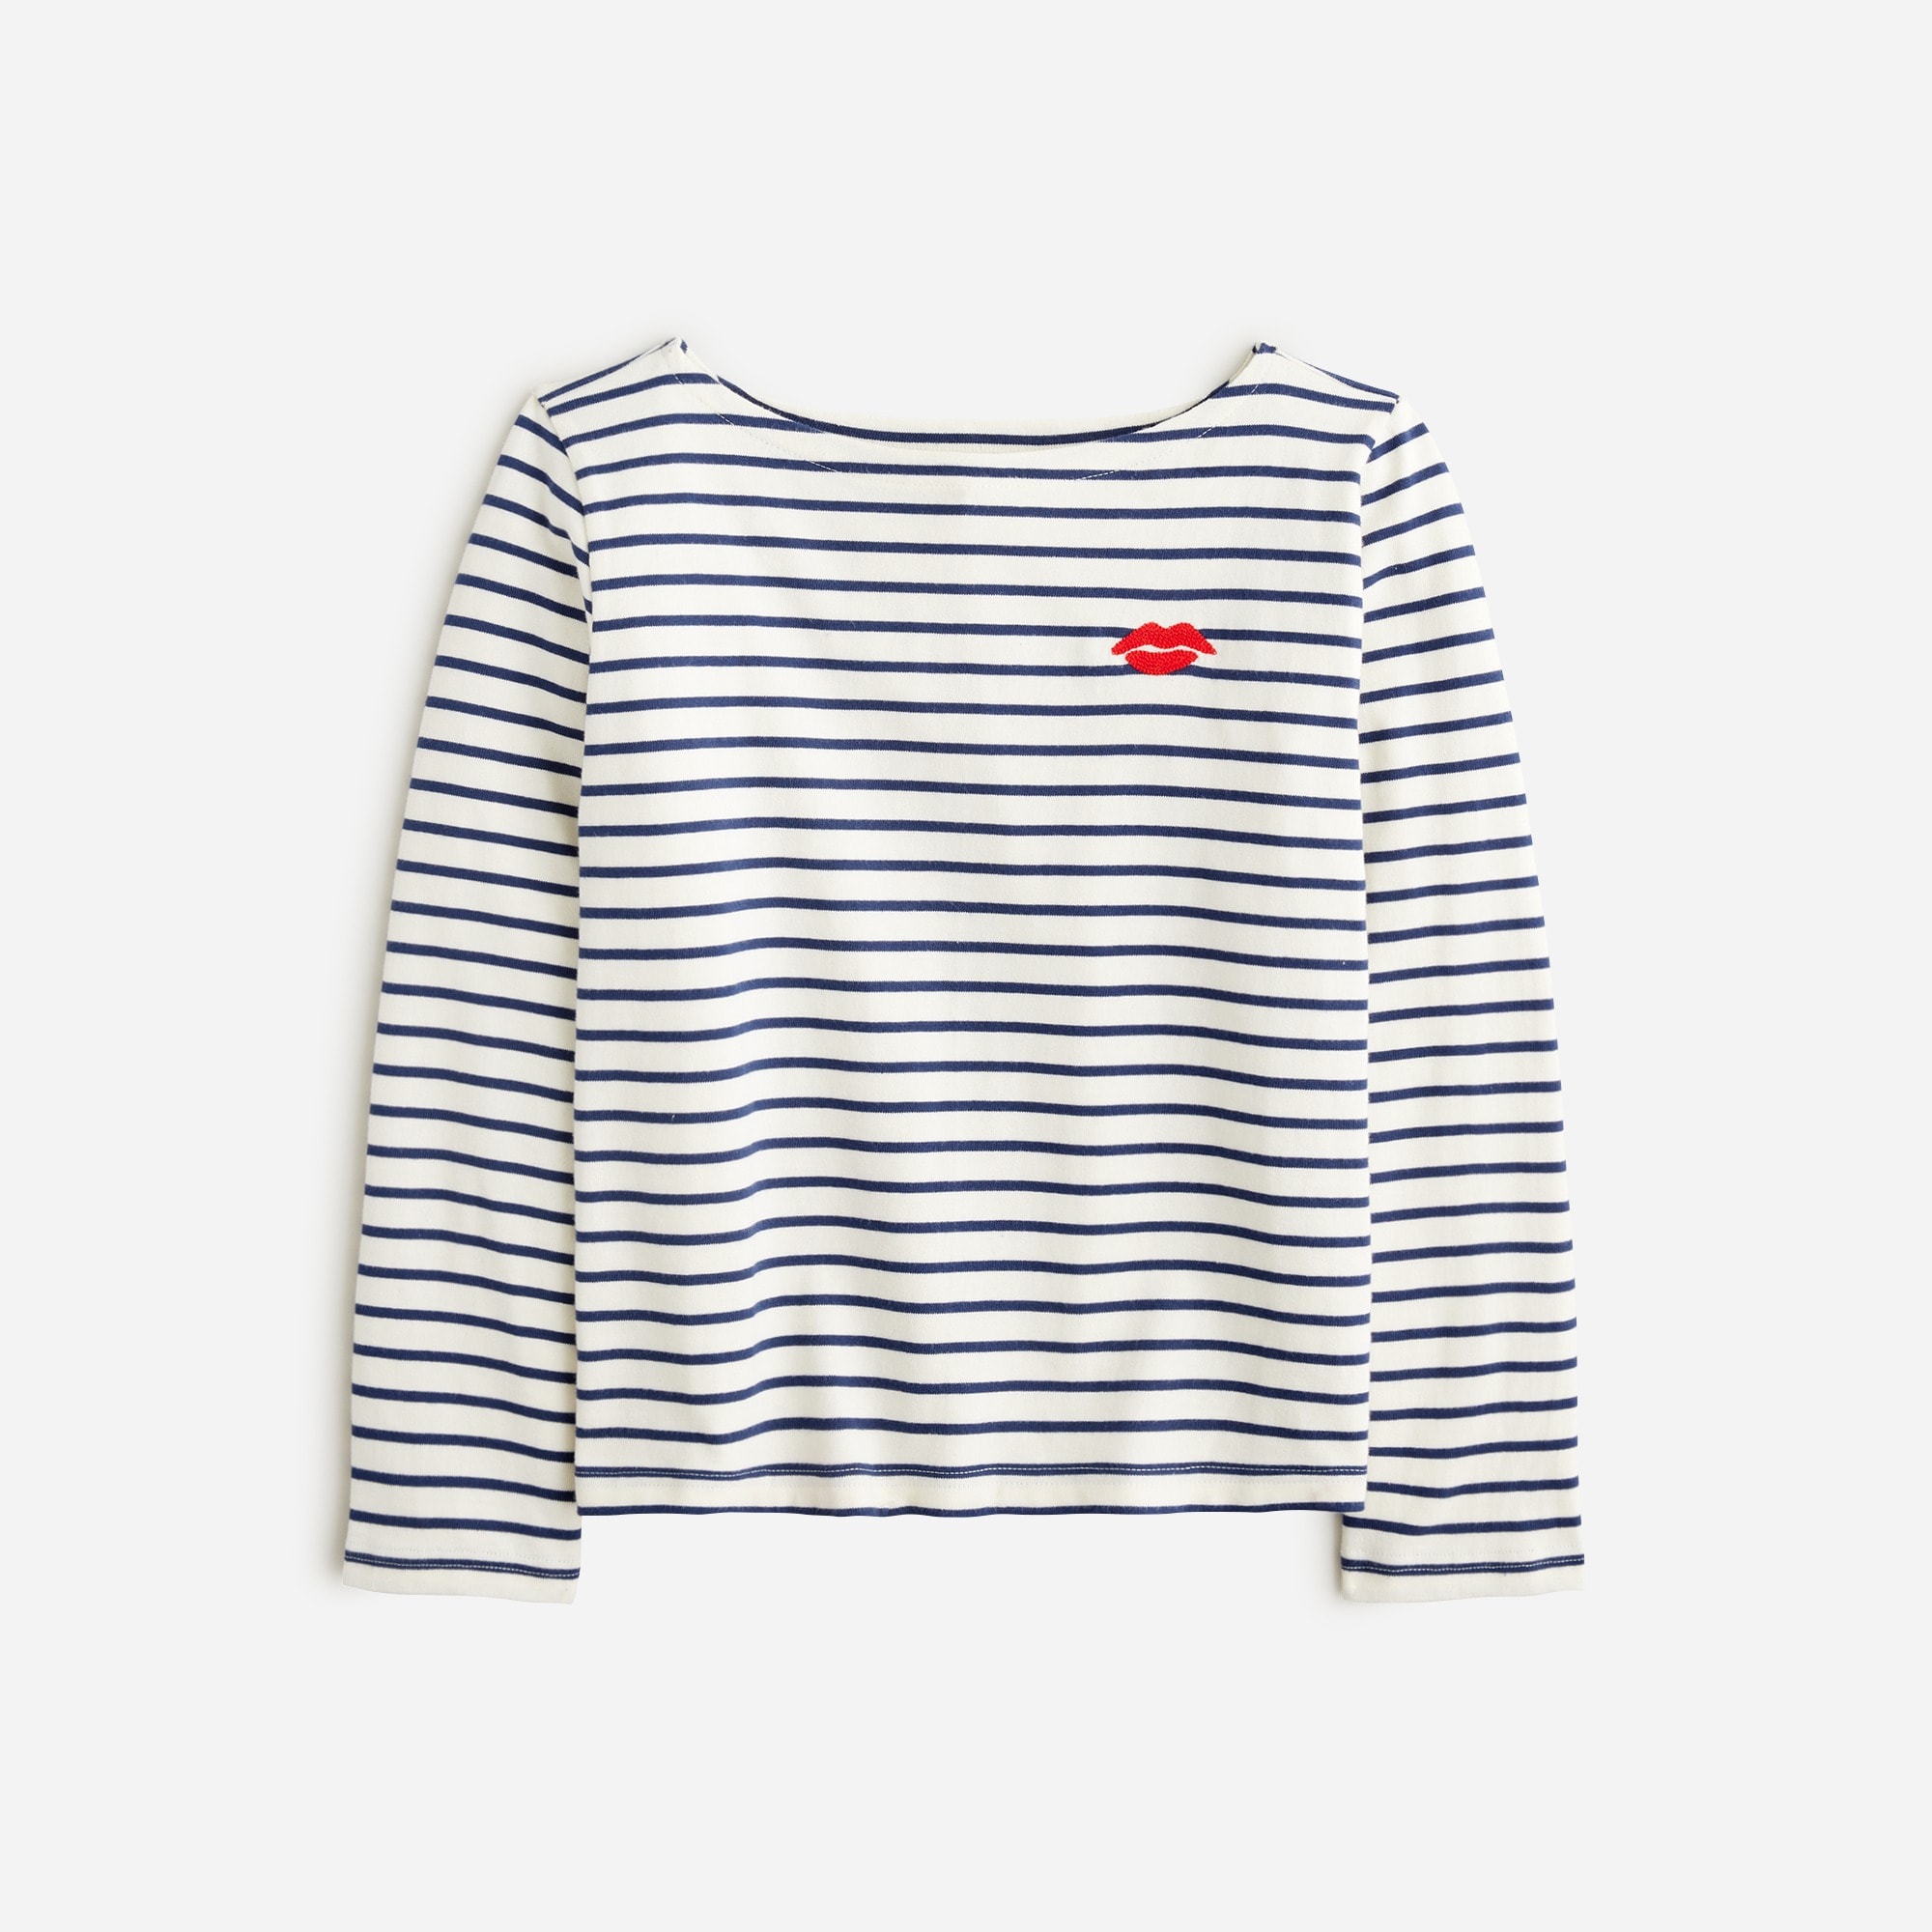  Classic mariner cloth boatneck T-shirt with embroidery